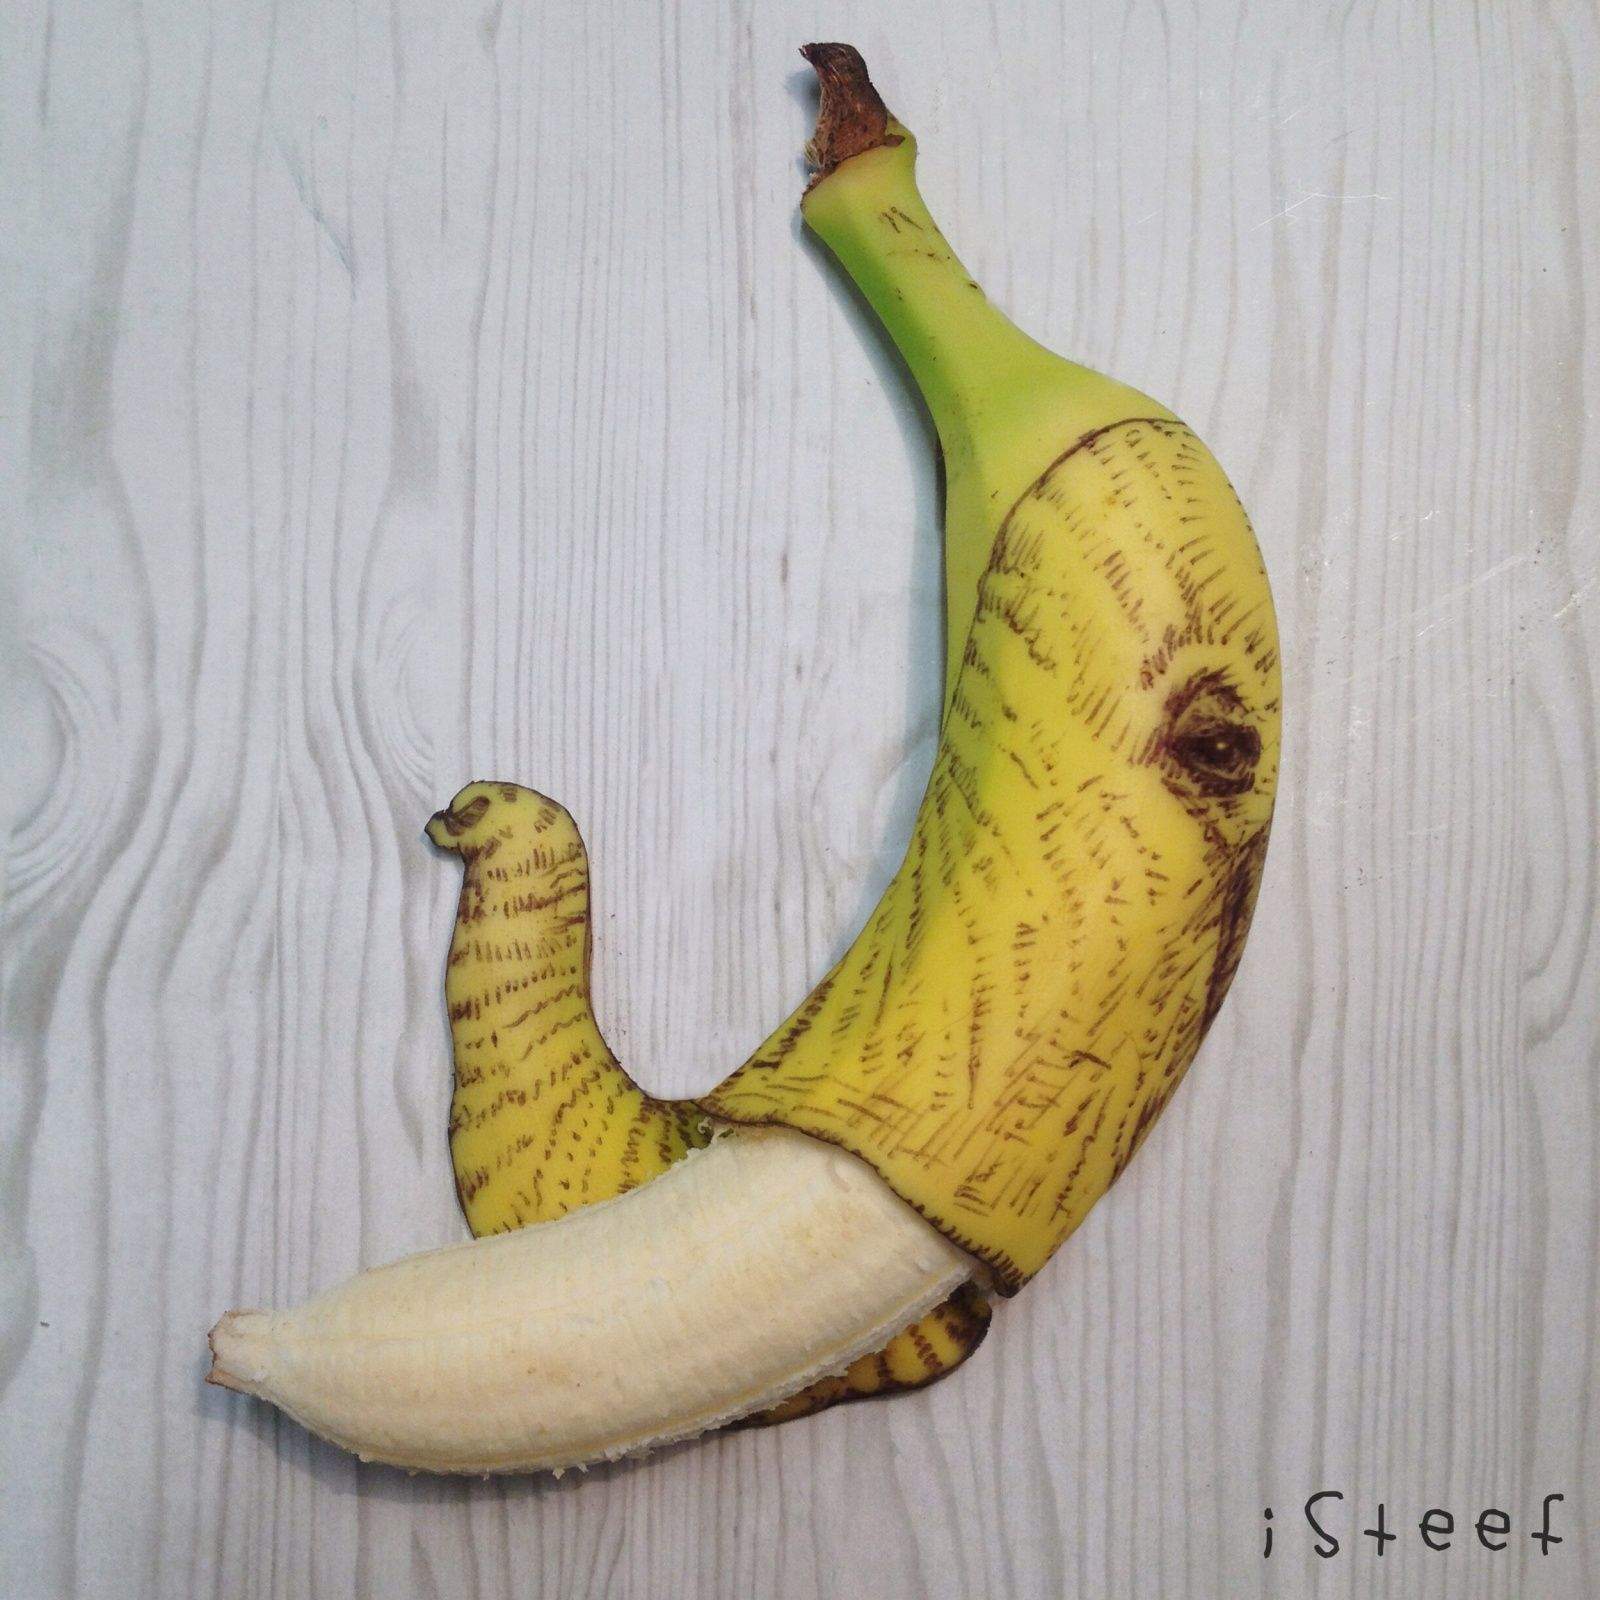 Stephan Brusche finds bananas to be a great surface for drawing and regularly posts his Fruitdoodles to Instagram. Photo: Stephan Brusche